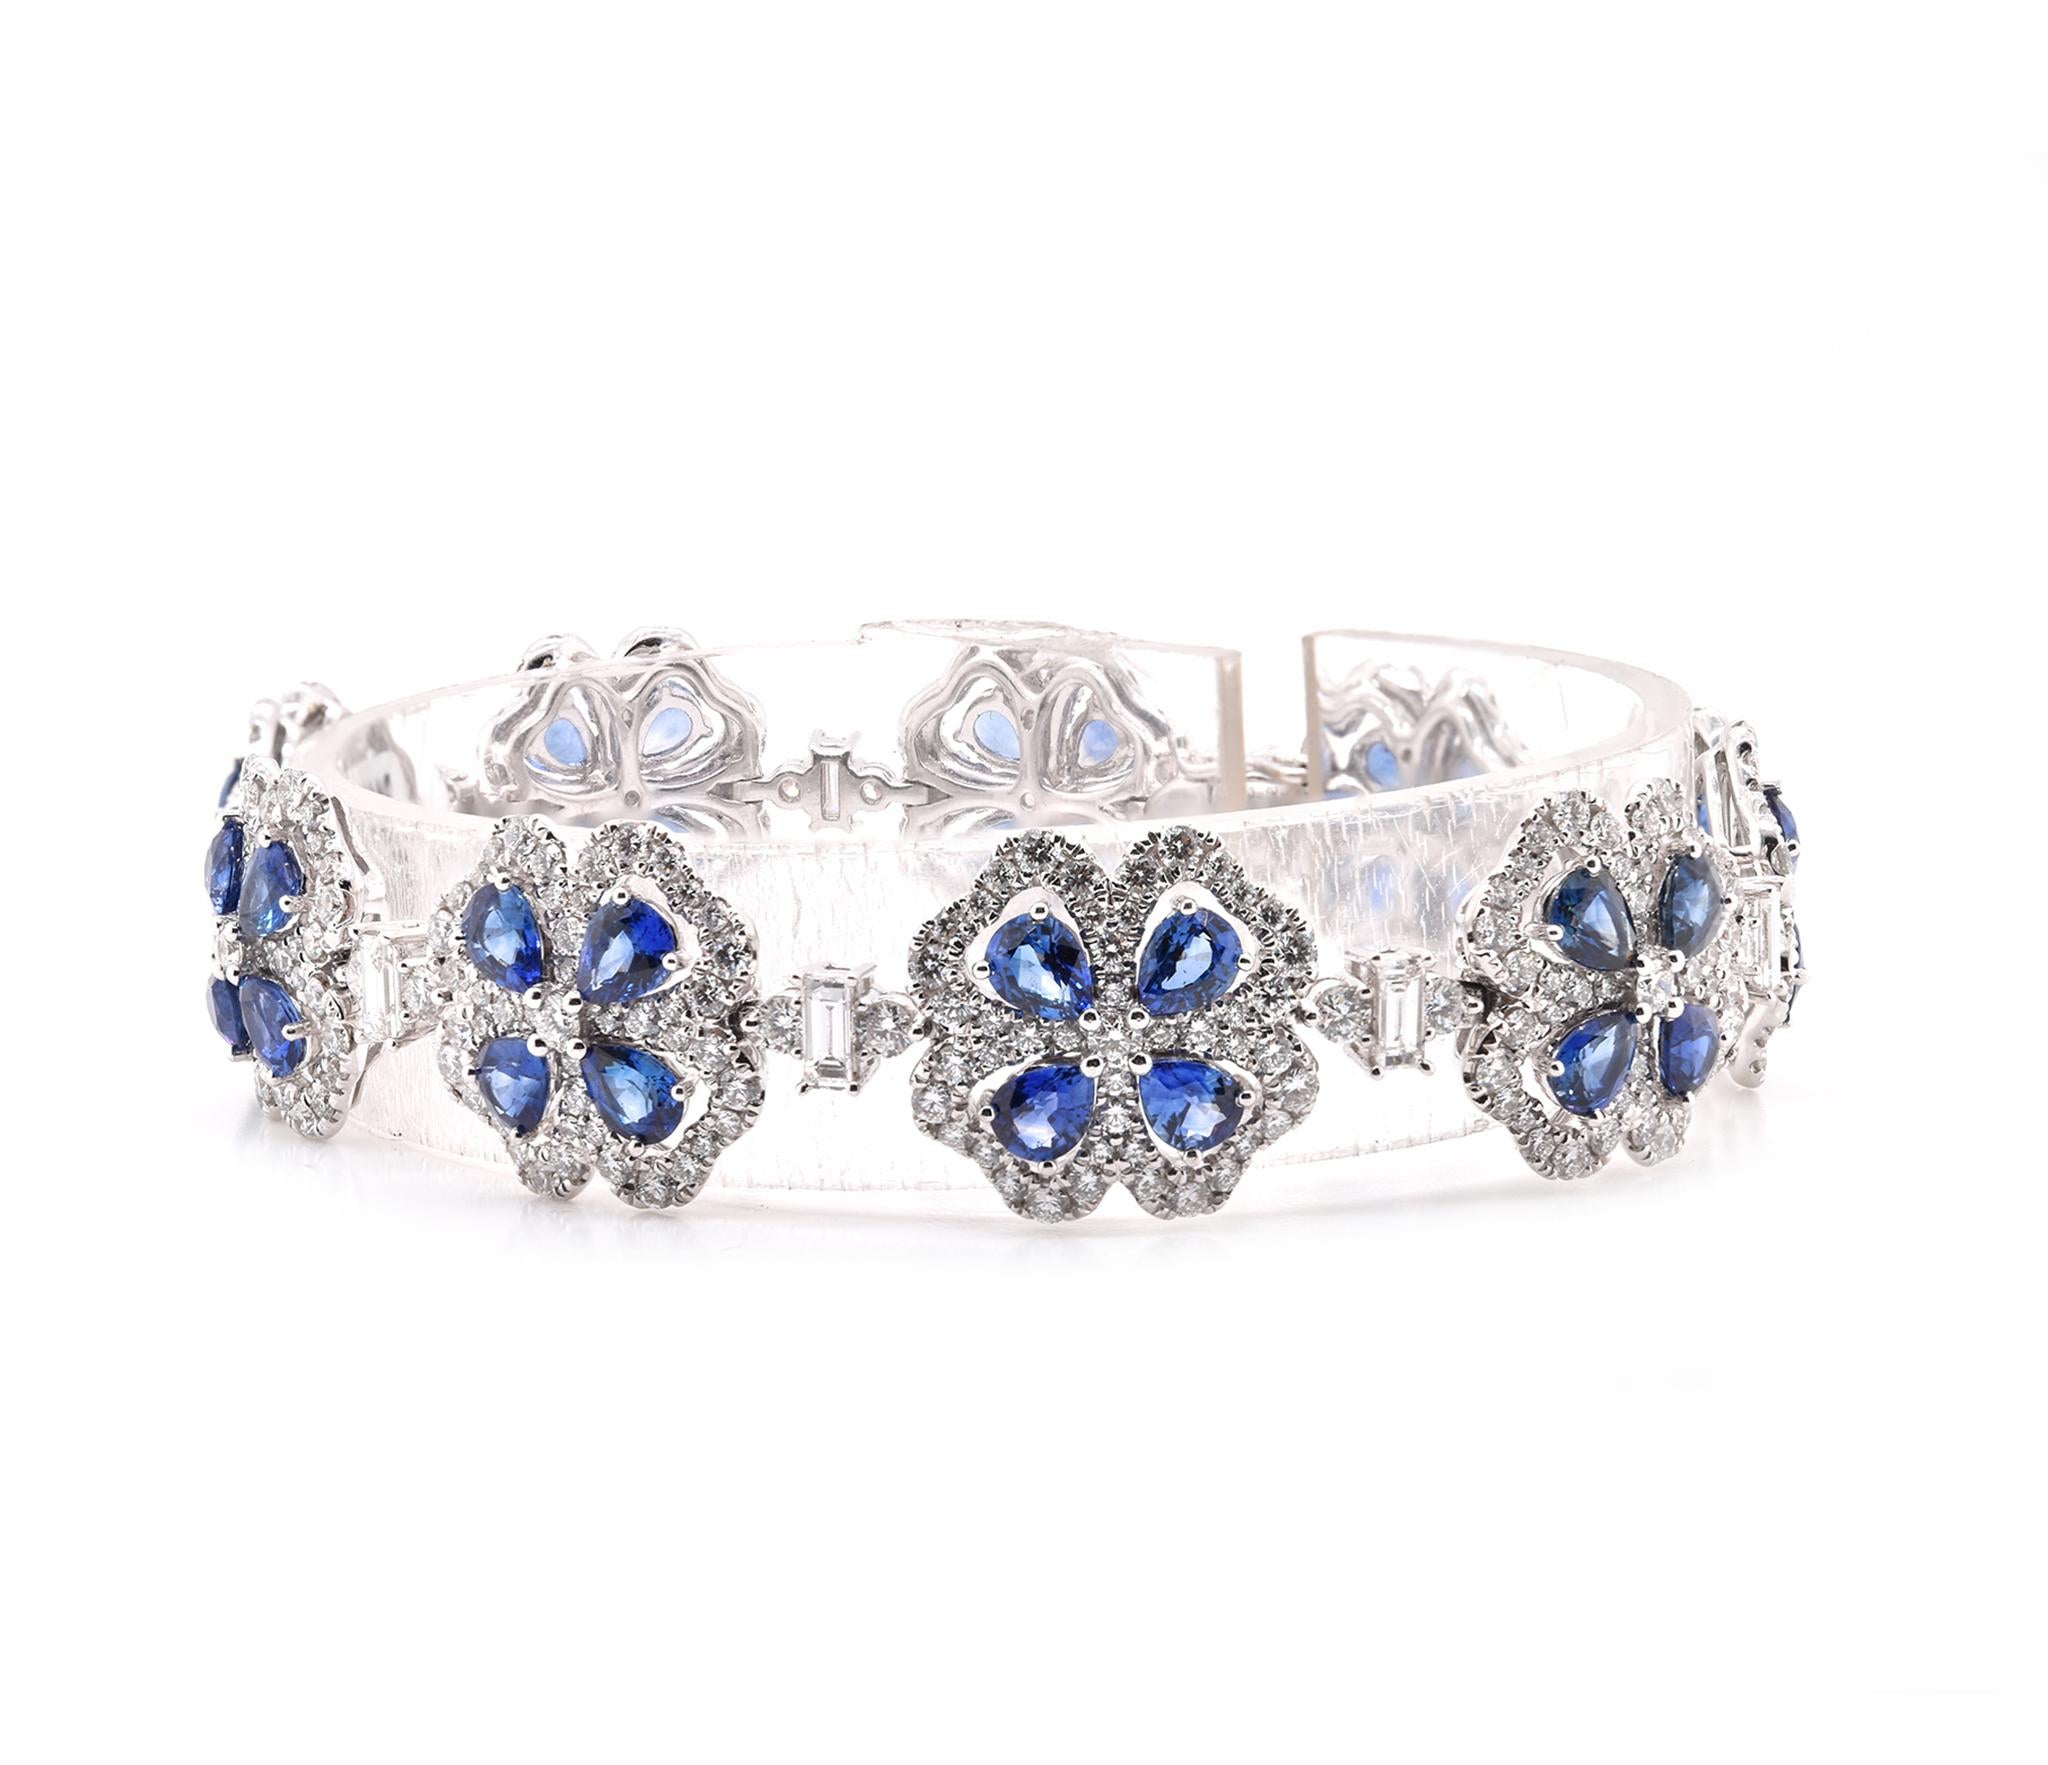 Designer: custom
Material: 14K white gold
Sapphire: 36 pear cut = 9.37cttw
Color: Blue
Clarity: AAA+
Diamond: 9 baguette and 415 round brilliant cut = 5.60cttw
Color: G
Clarity: VS
Weight:  26.03 grams
Dimensions: bracelet measures 7-inches
